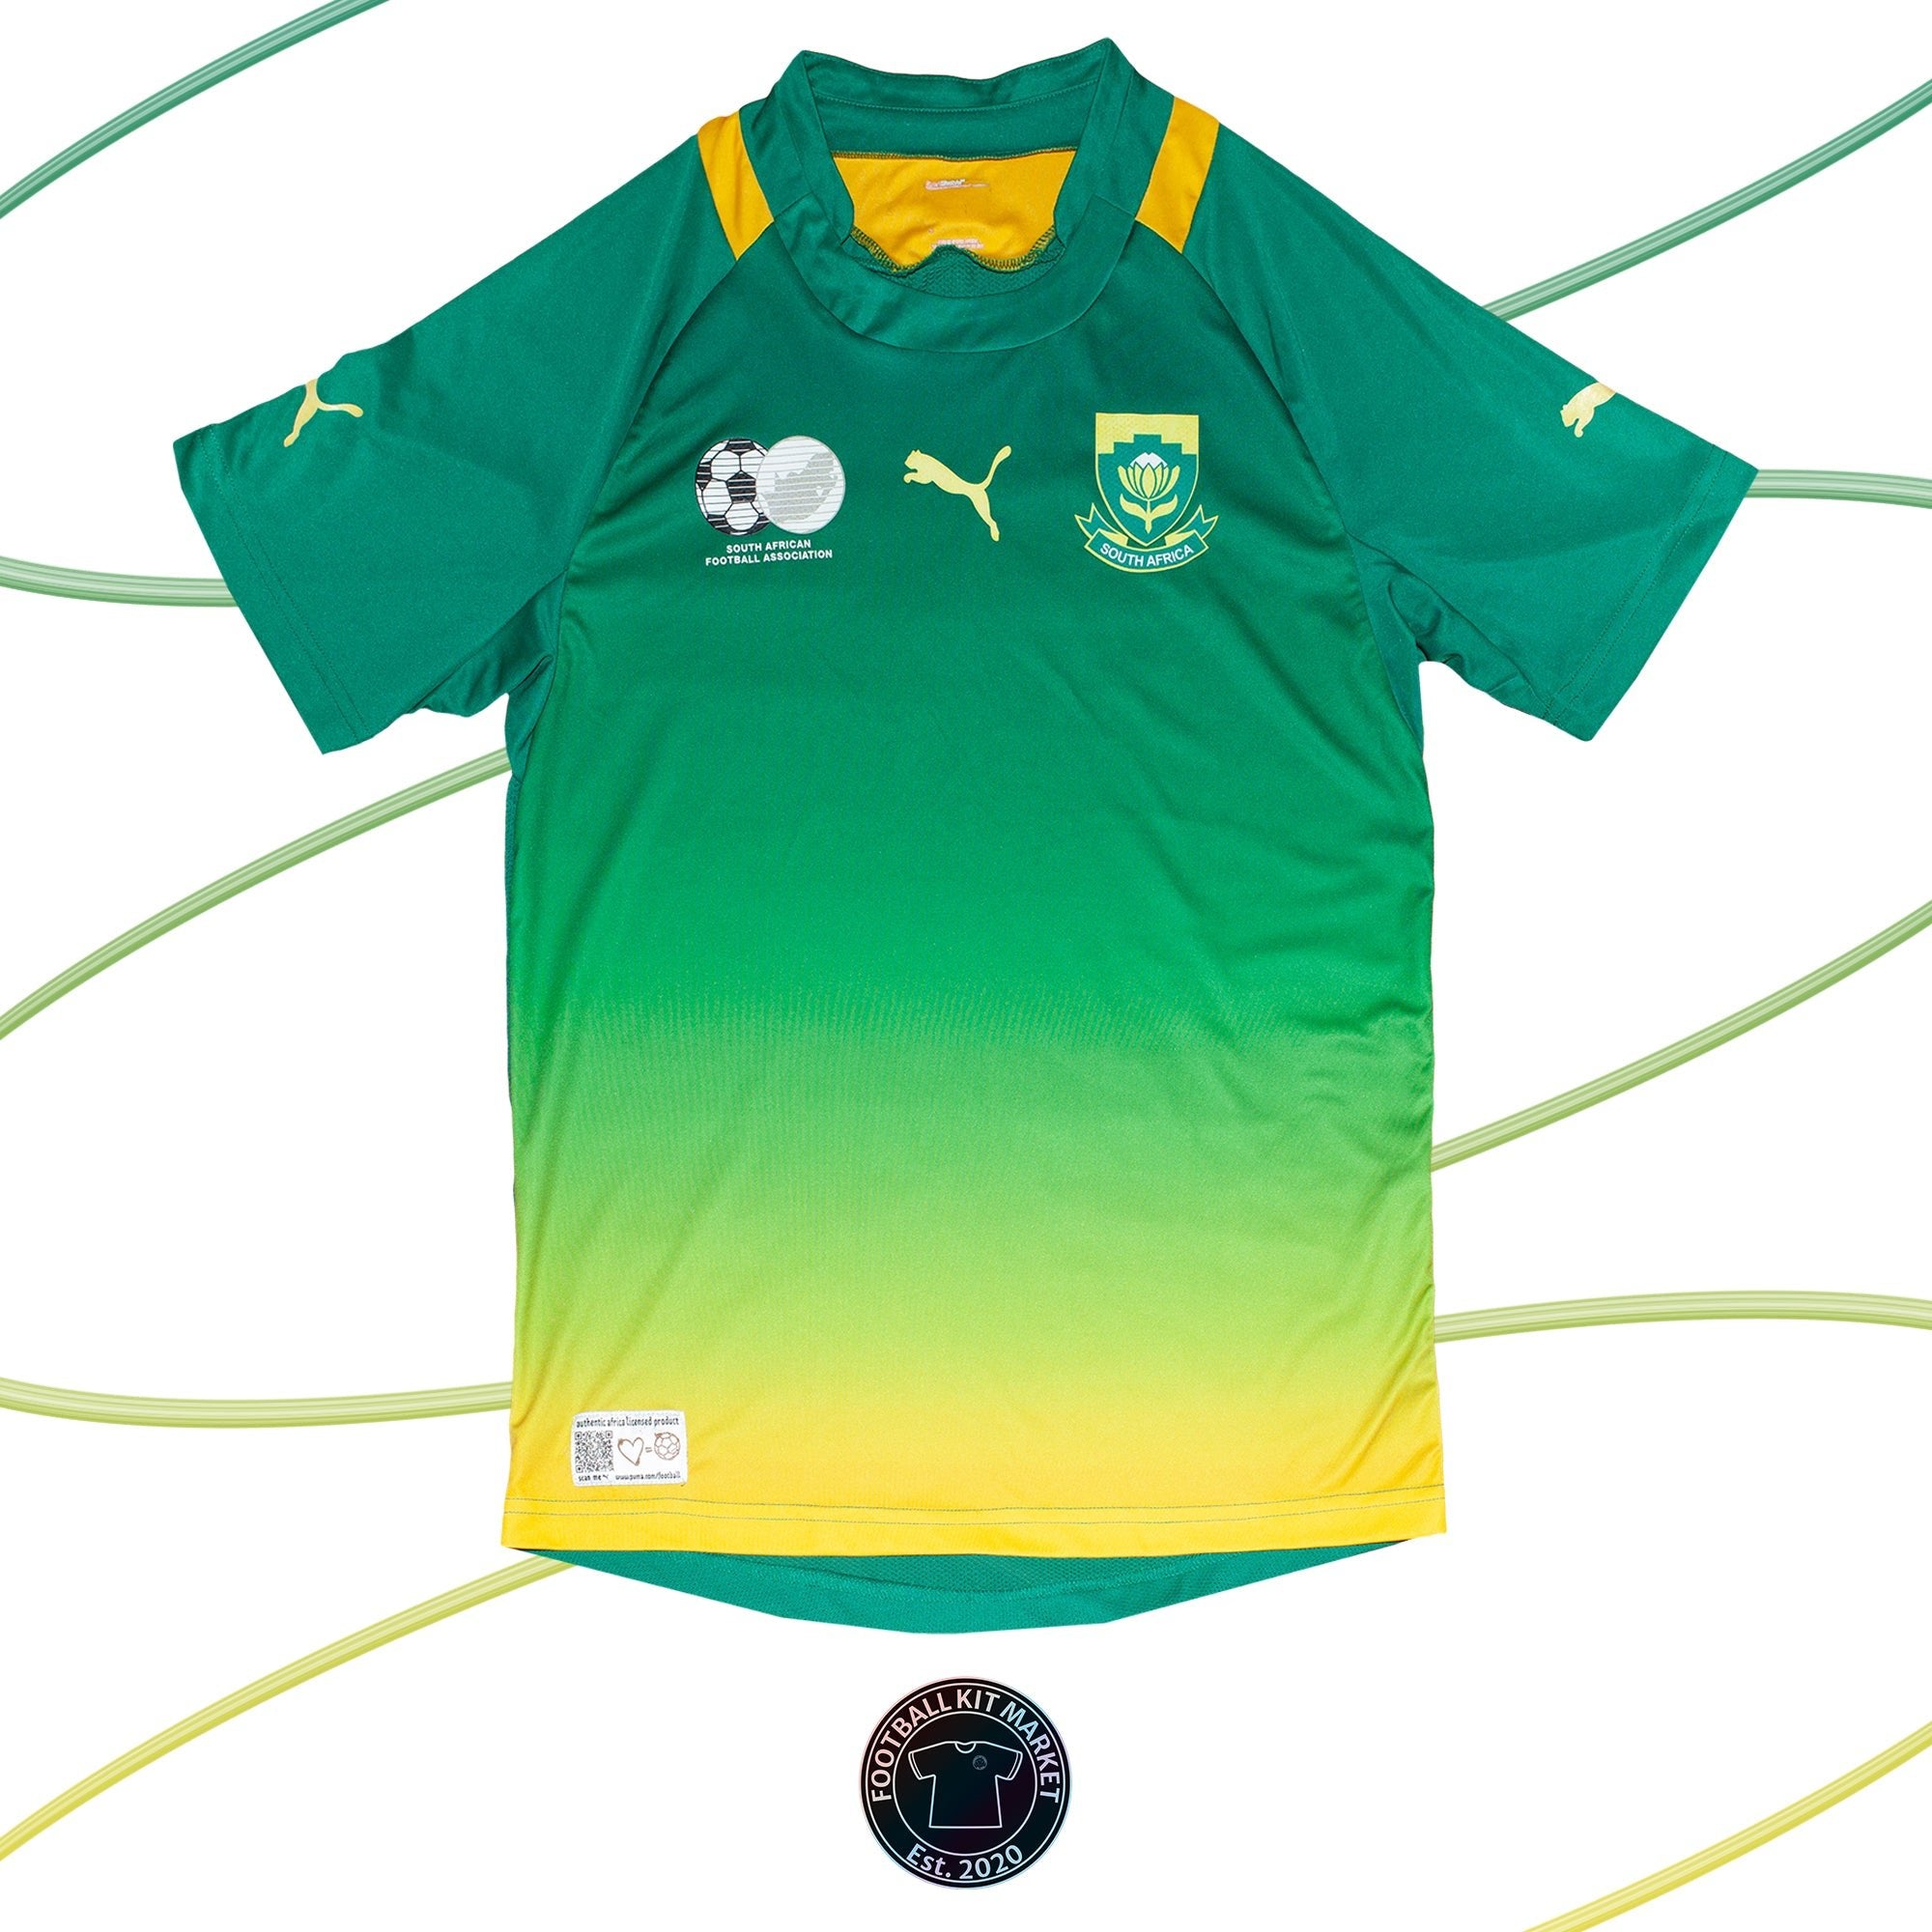 Genuine SOUTH AFRICA Away Shirt (2013-2014) - PUMA (M) - Product Image from Football Kit Market